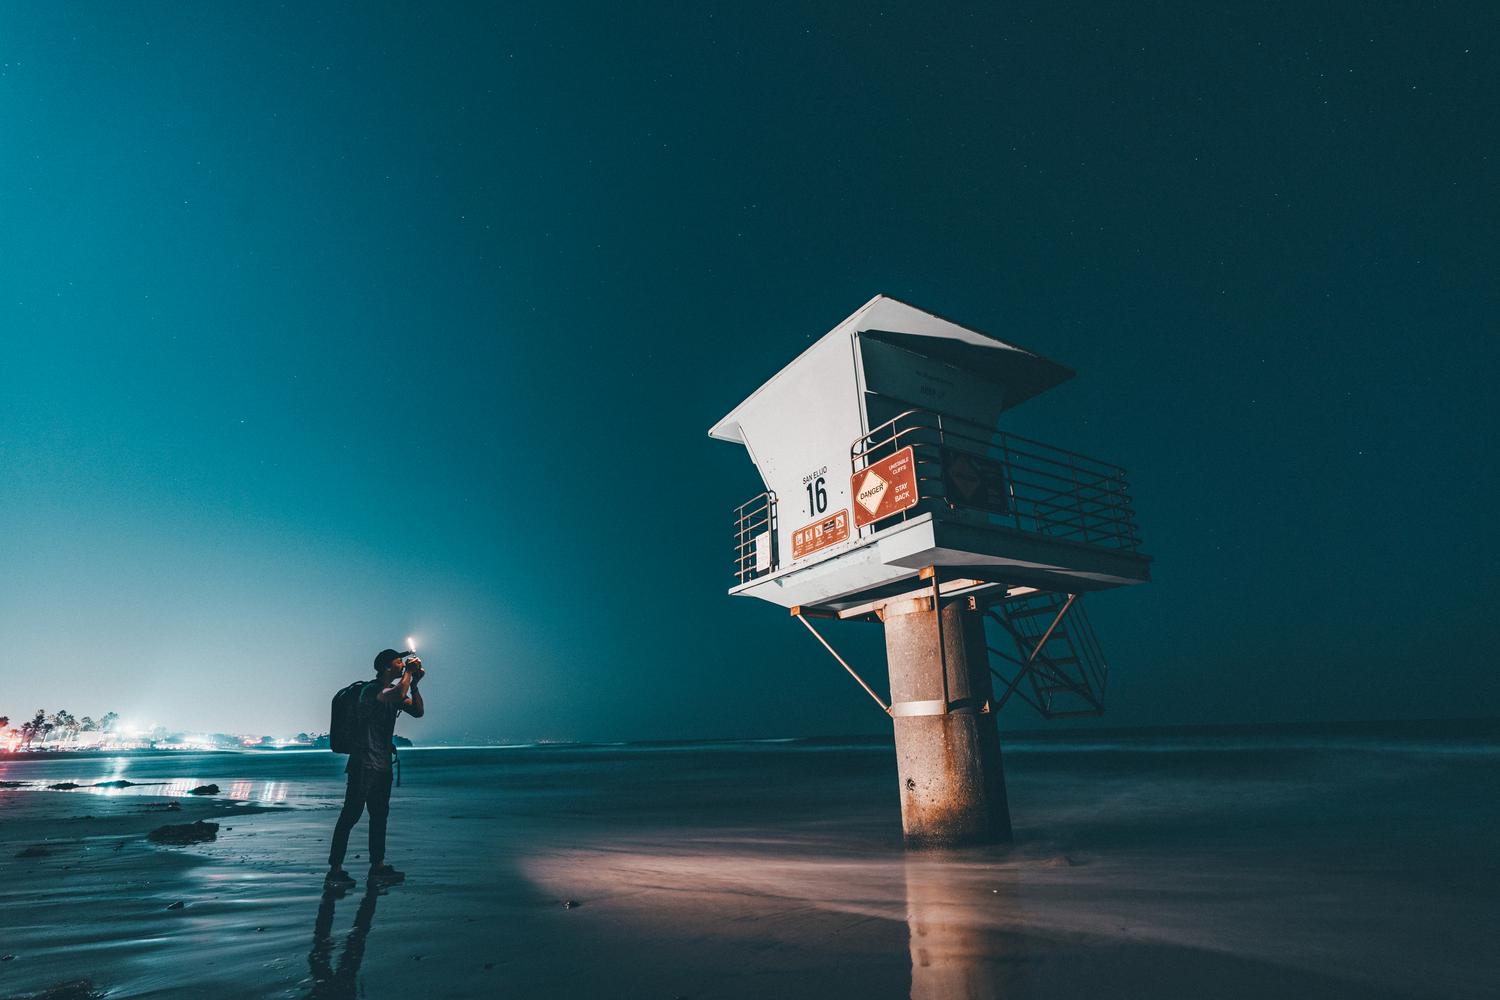 Shot with Lume Series: Abduction in Laguna by JP Ramirez